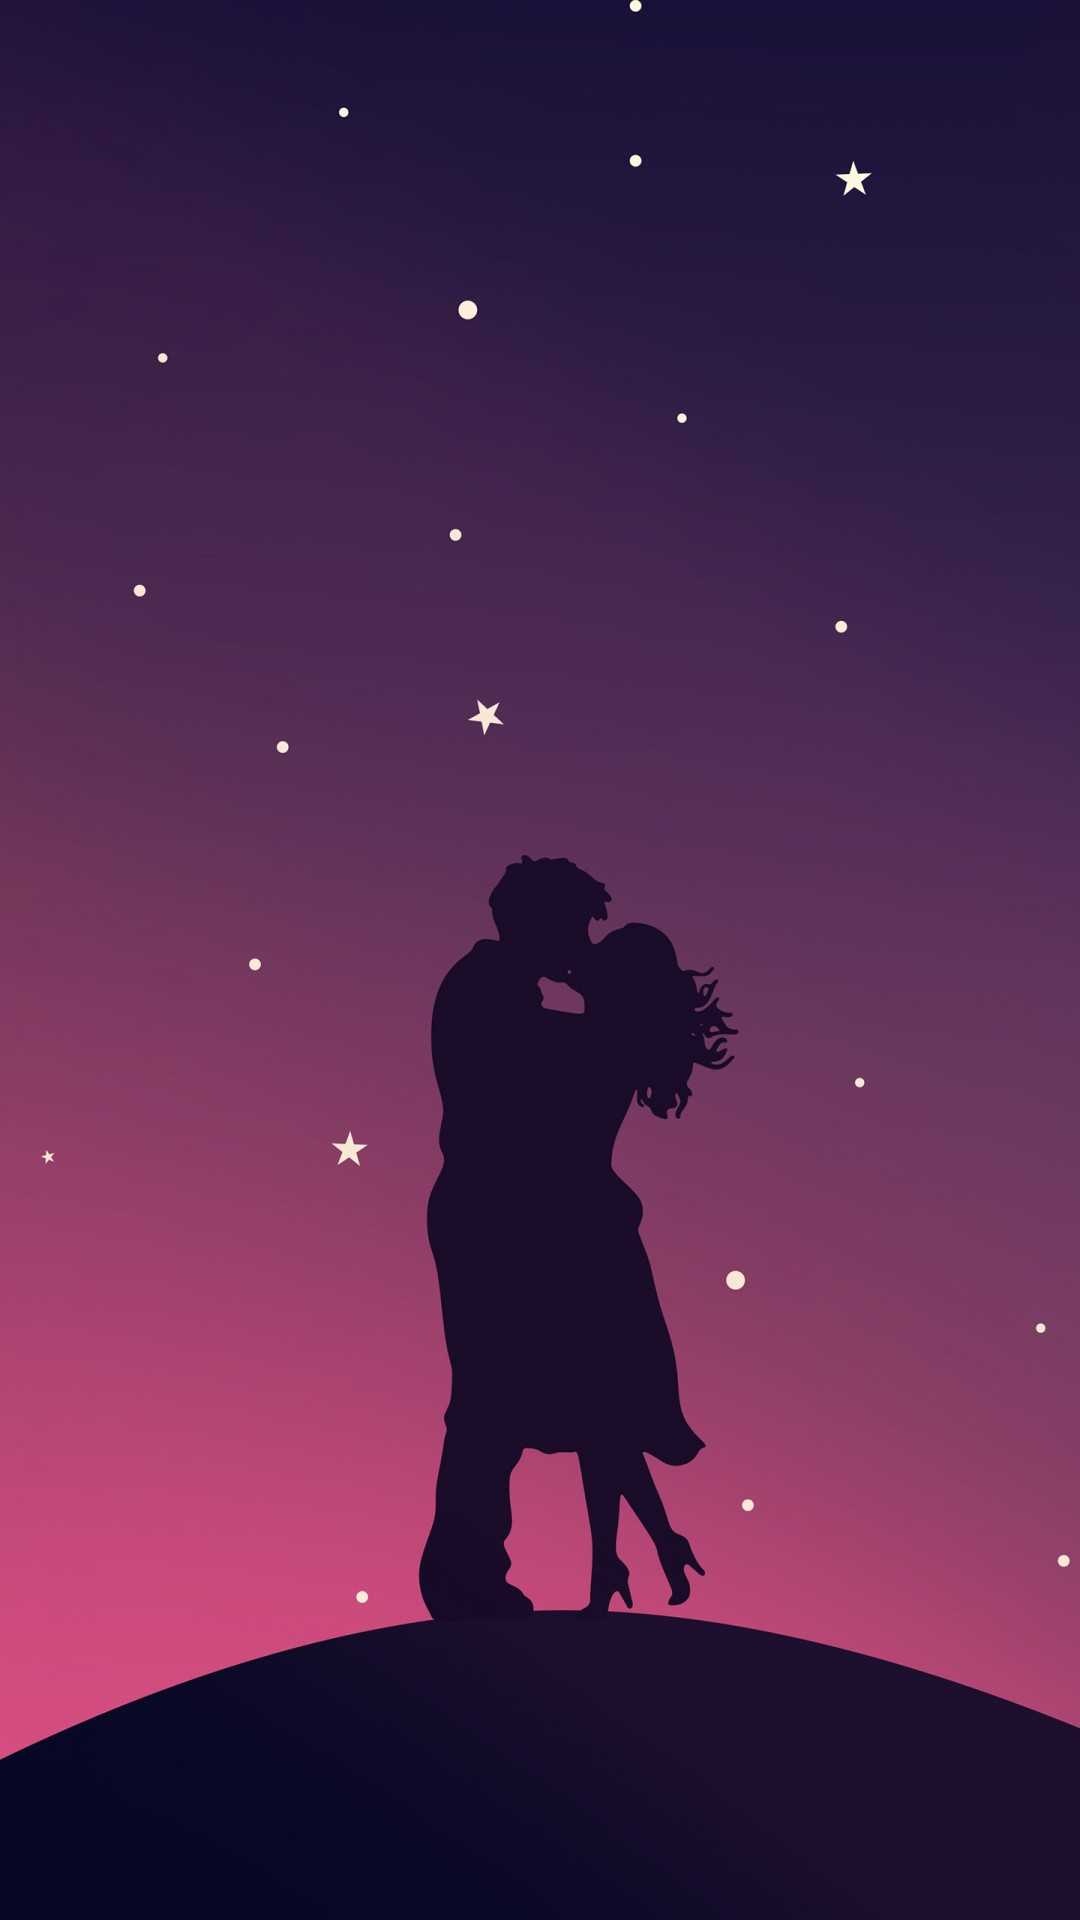 Couple wallpaper, Images, Photos, Love, 1080x1920 Full HD Handy